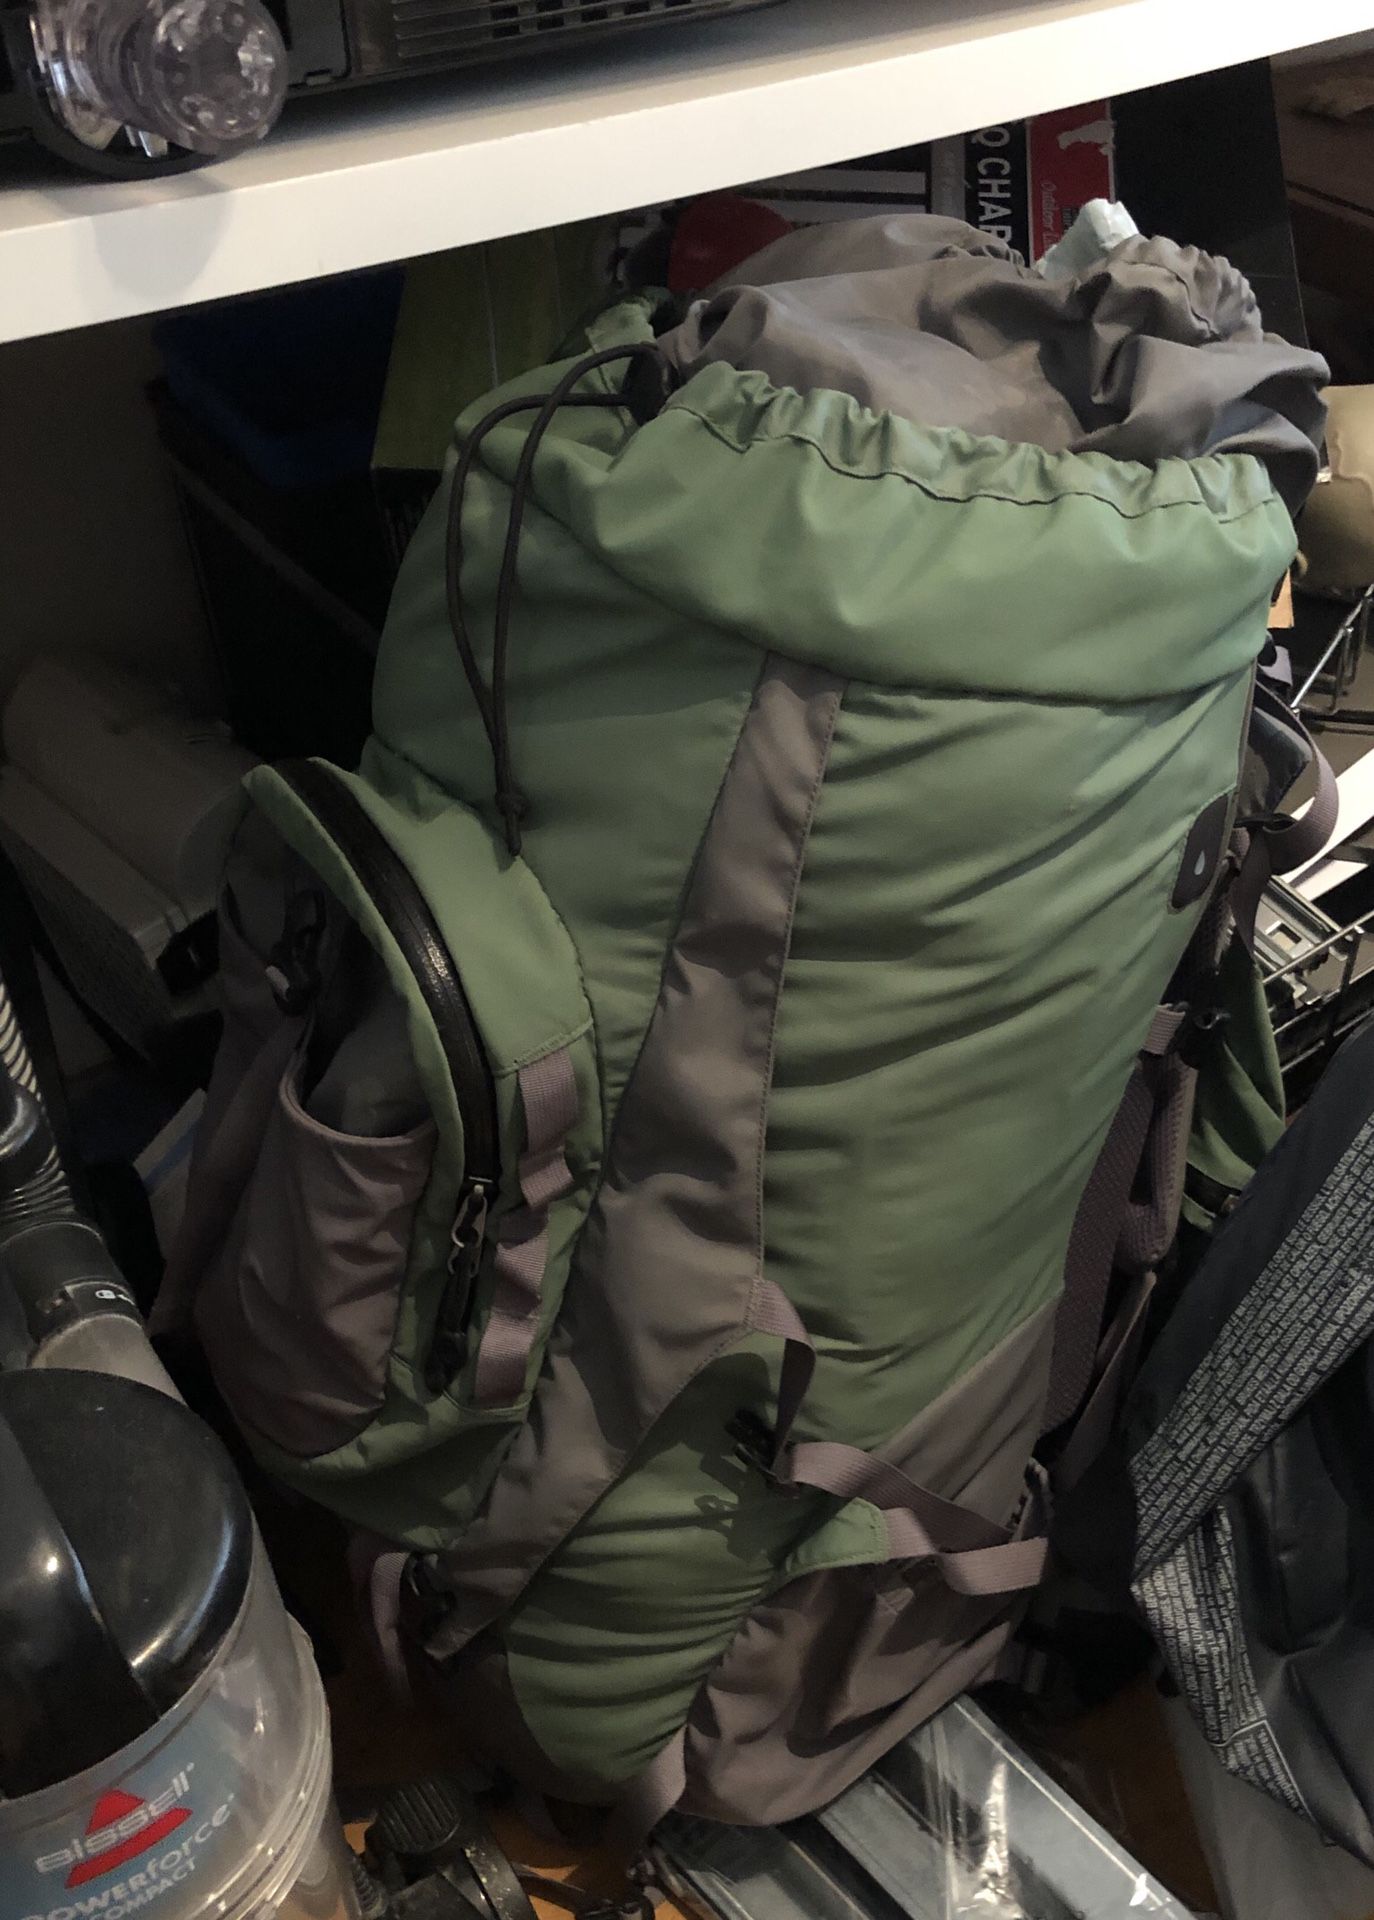 REI Venus 70 backpack and camping tent